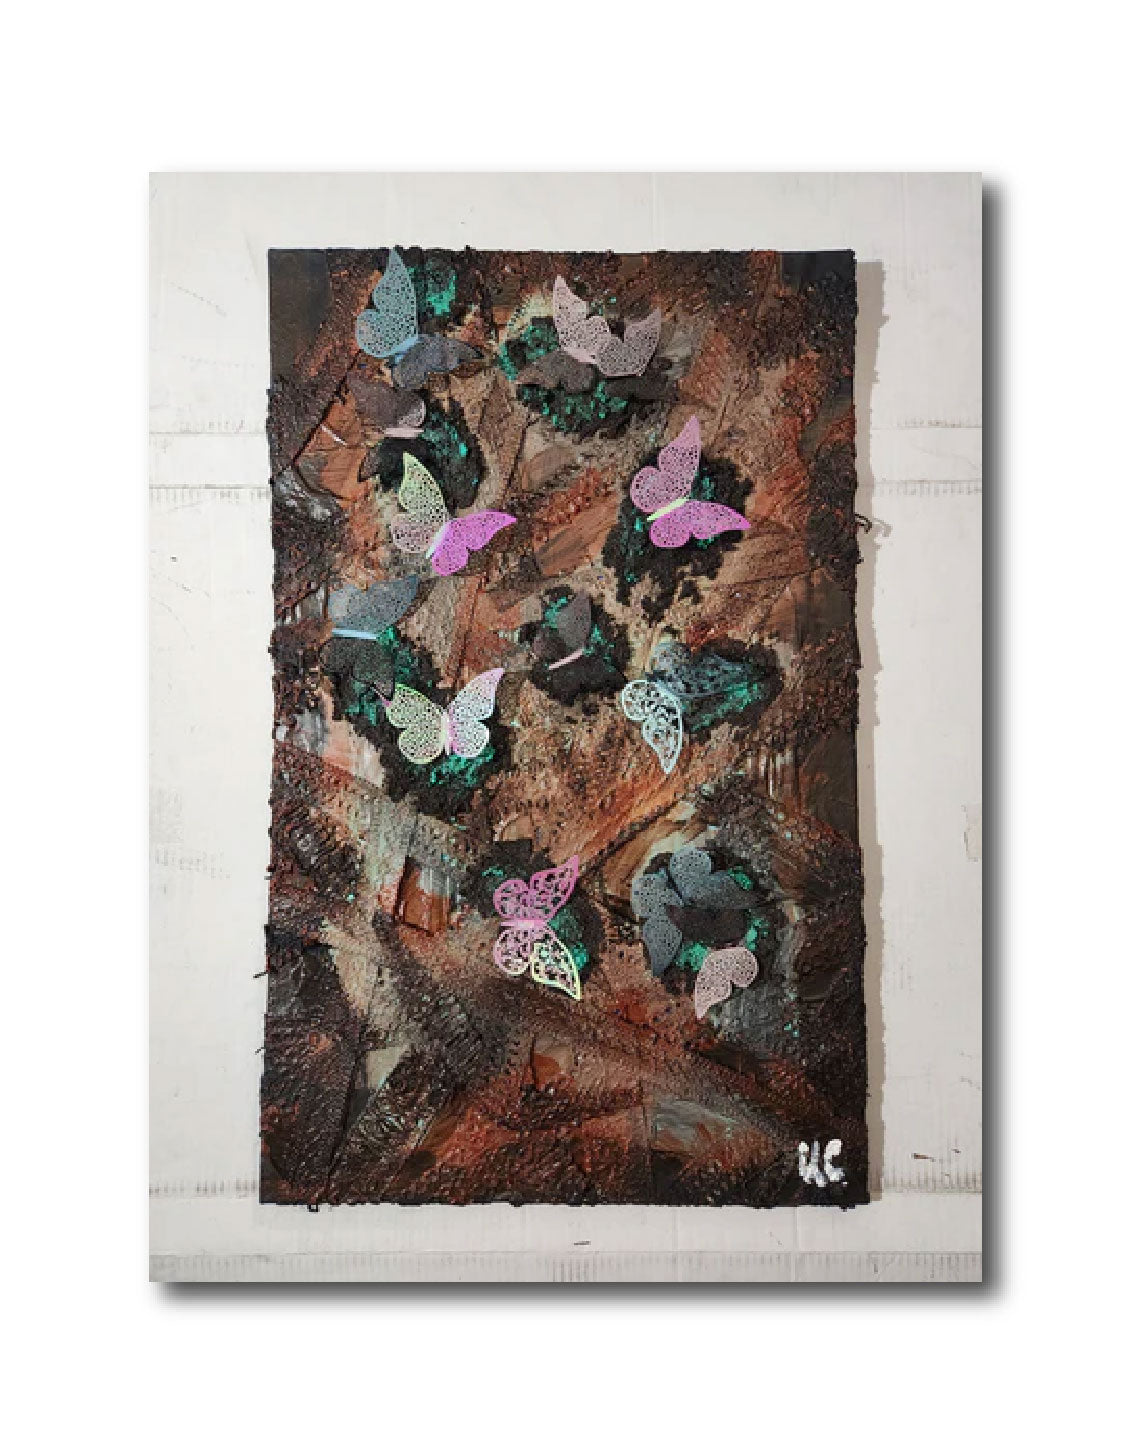 'A MAGIC NESTS' - Acrylic, Object, and Mixed Media on Canvas